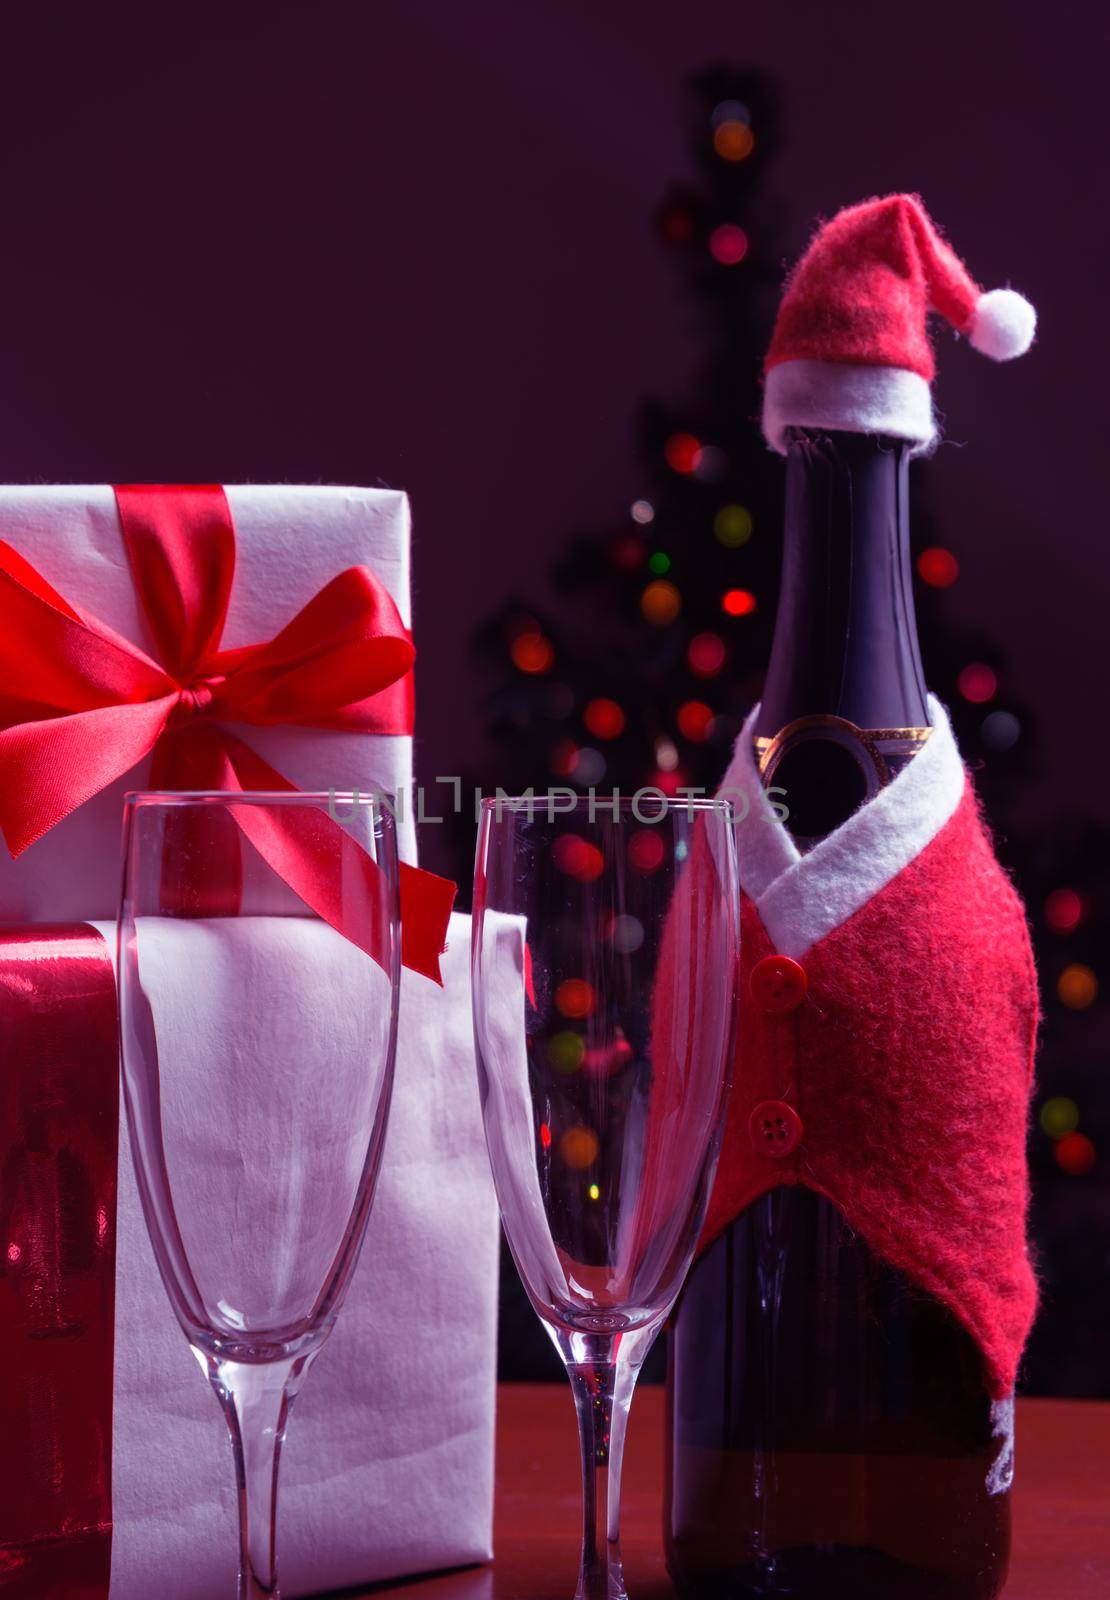 Bottle of champagne, glasses, gift boxes on the background of Christmas tree